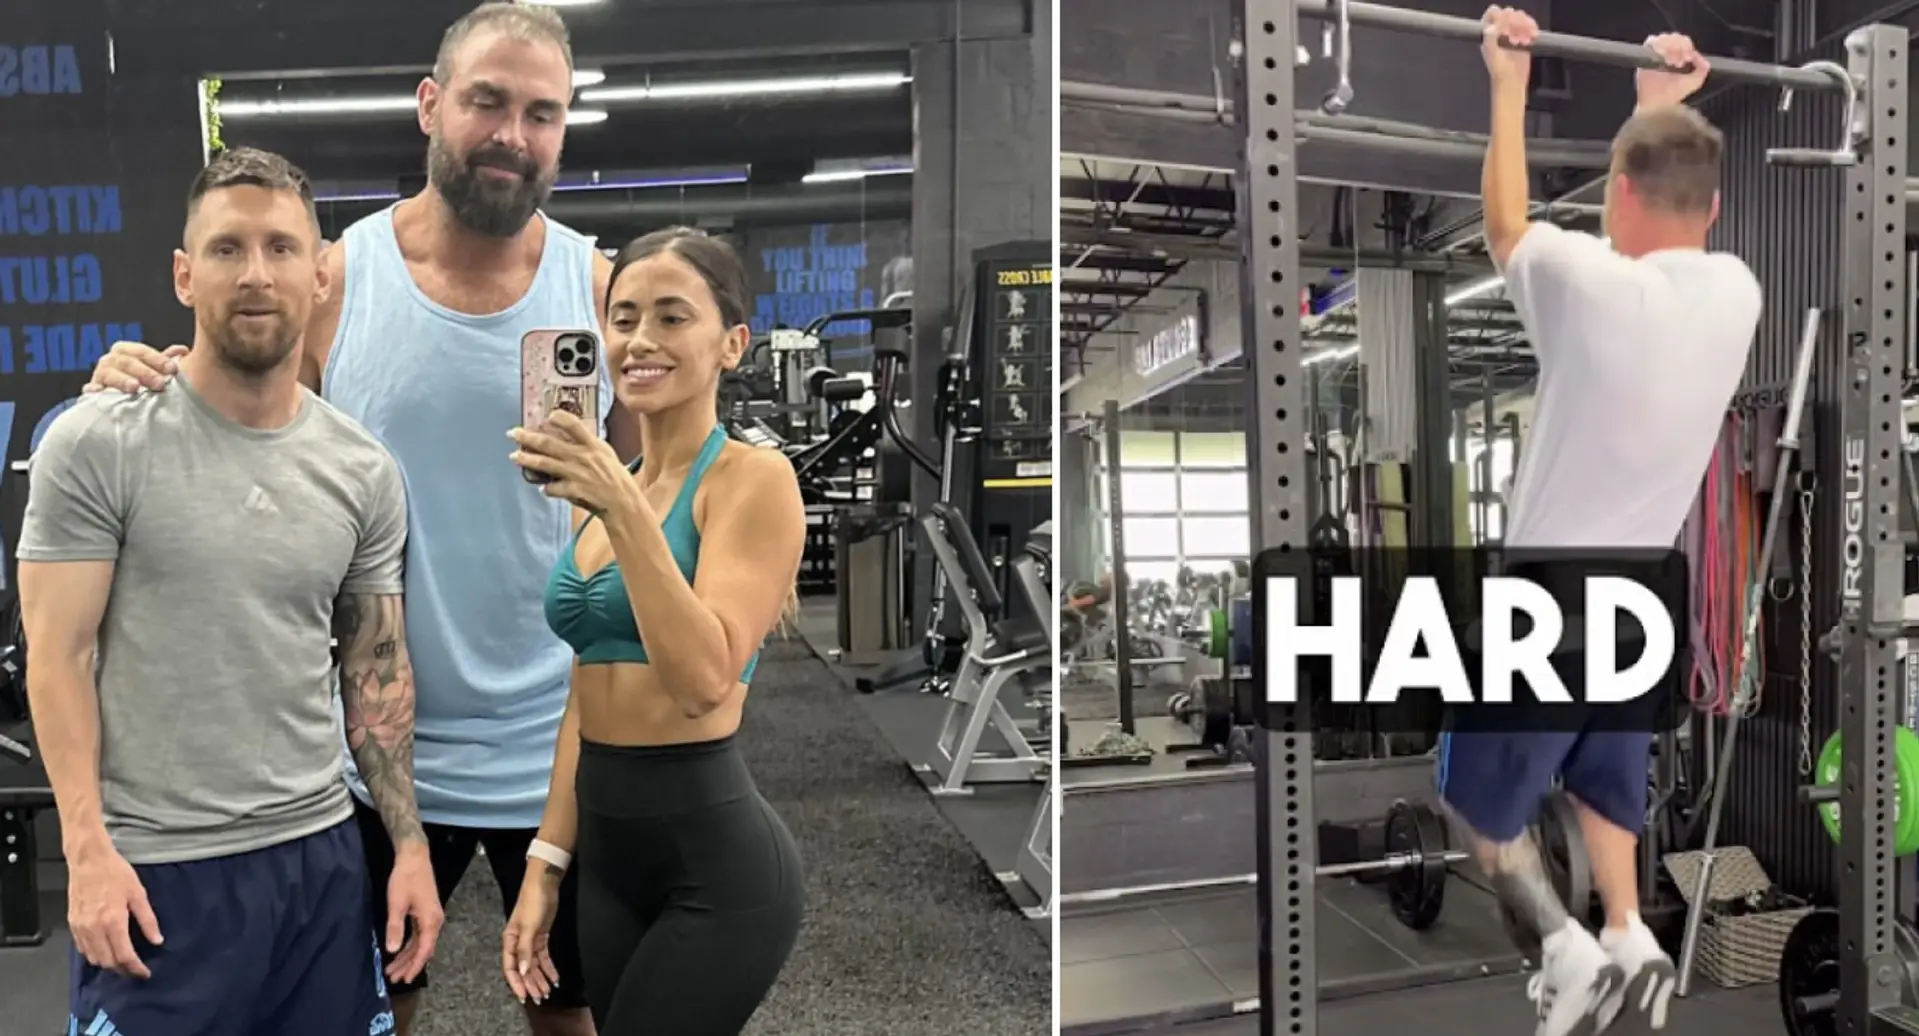 'Man is getting RIPPED': Fans react as Antonela shares fresh gym pic with Leo Messi